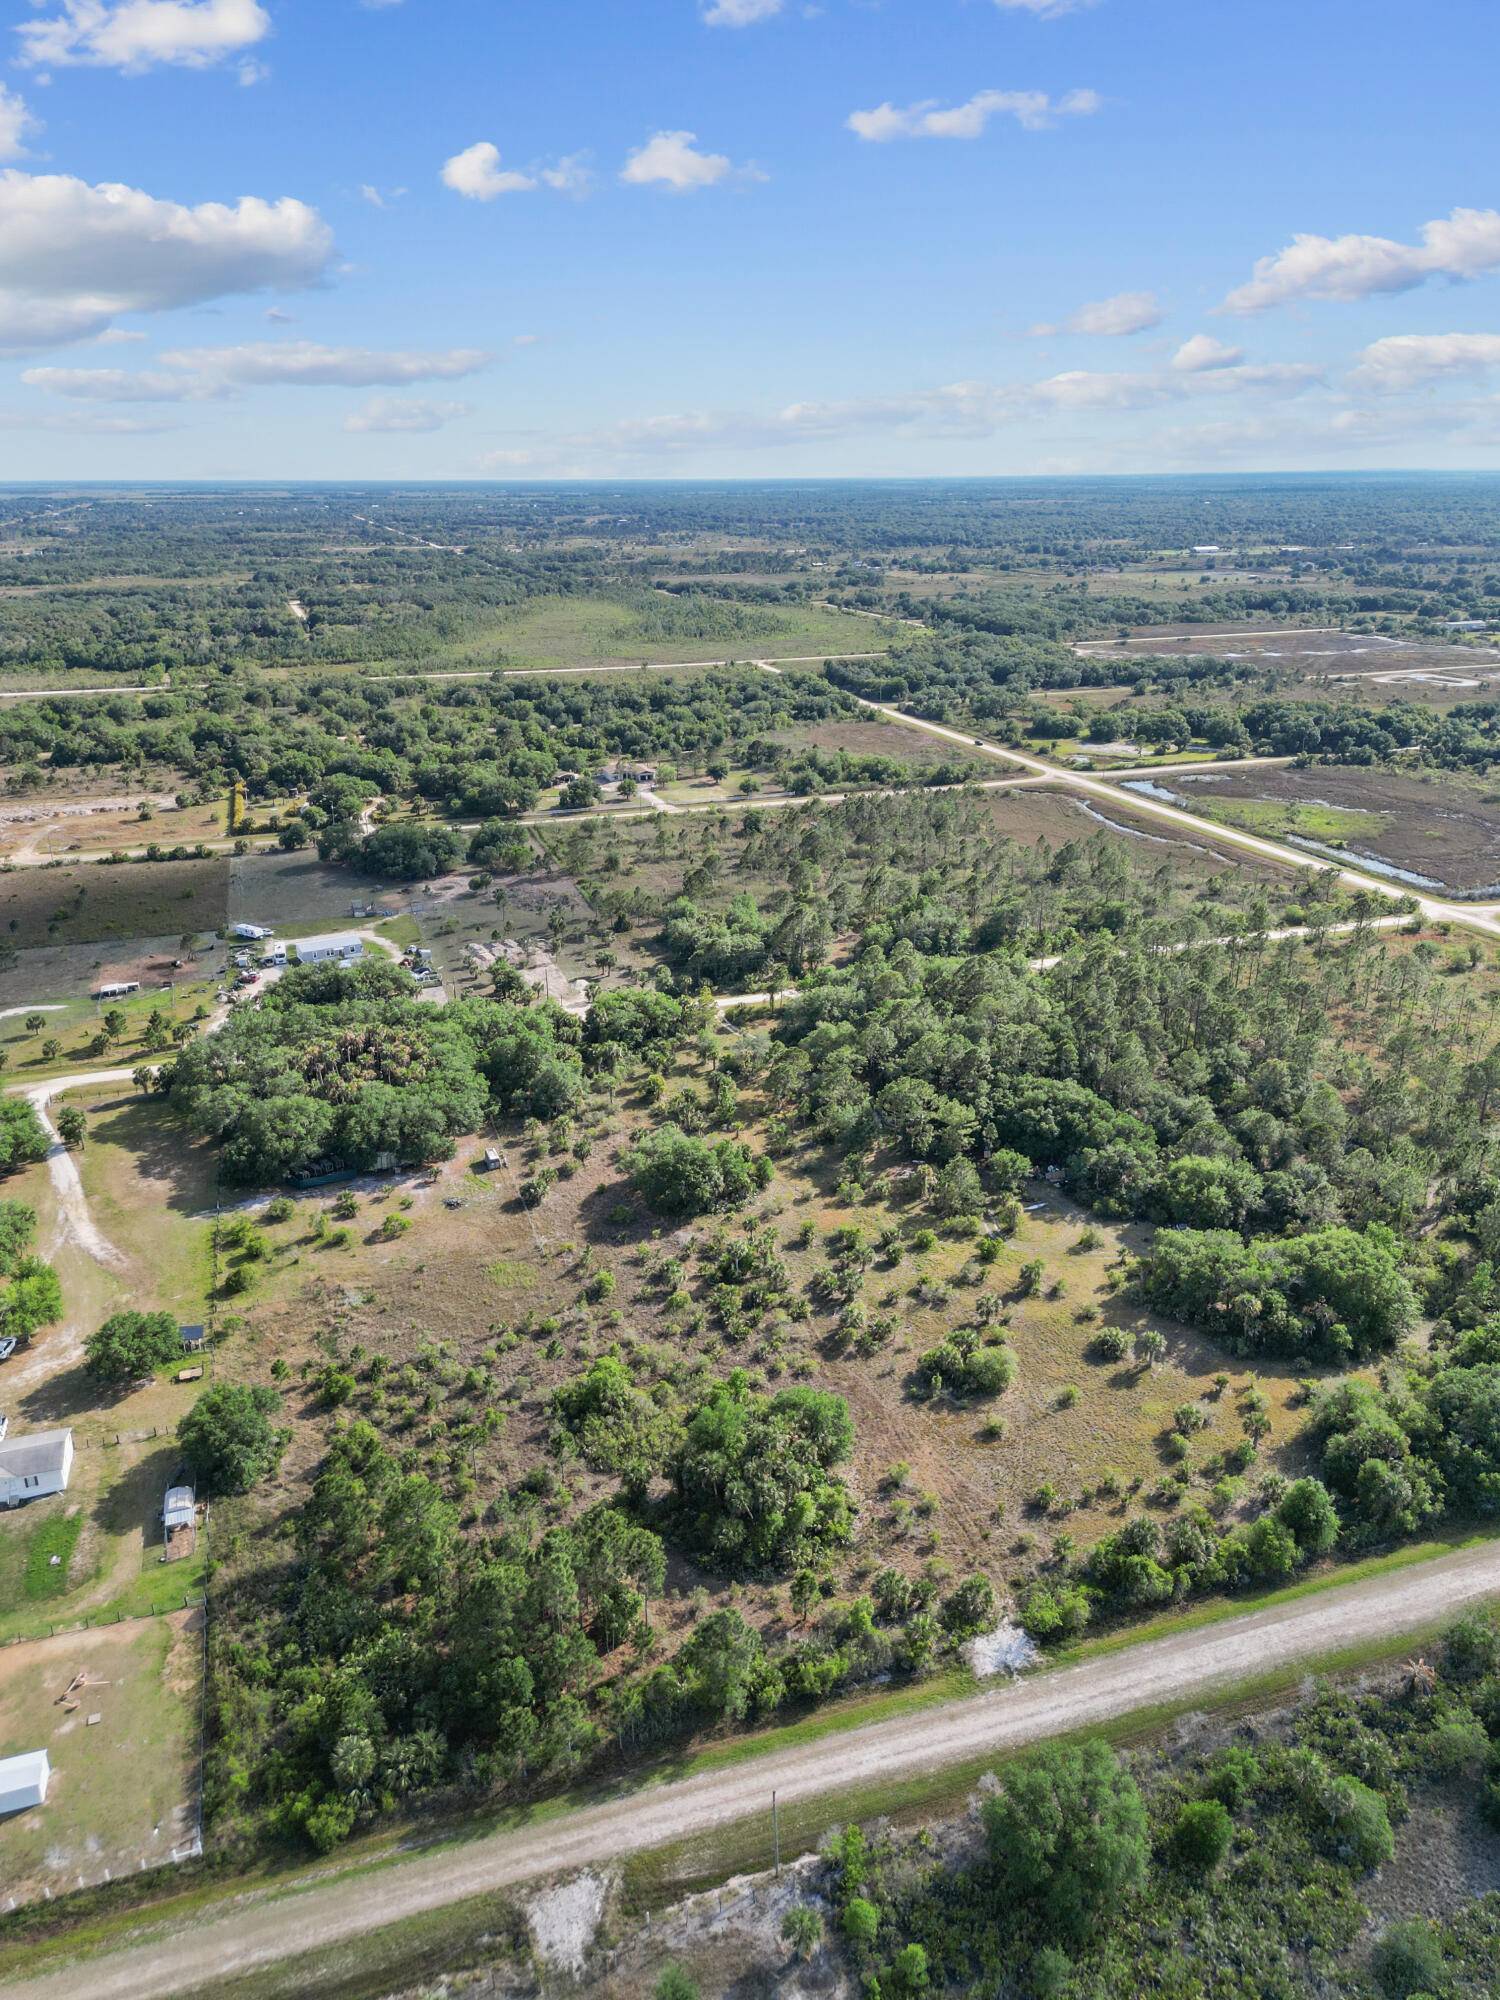 This beautiful parcel of land located in the heart of Okeechobee.